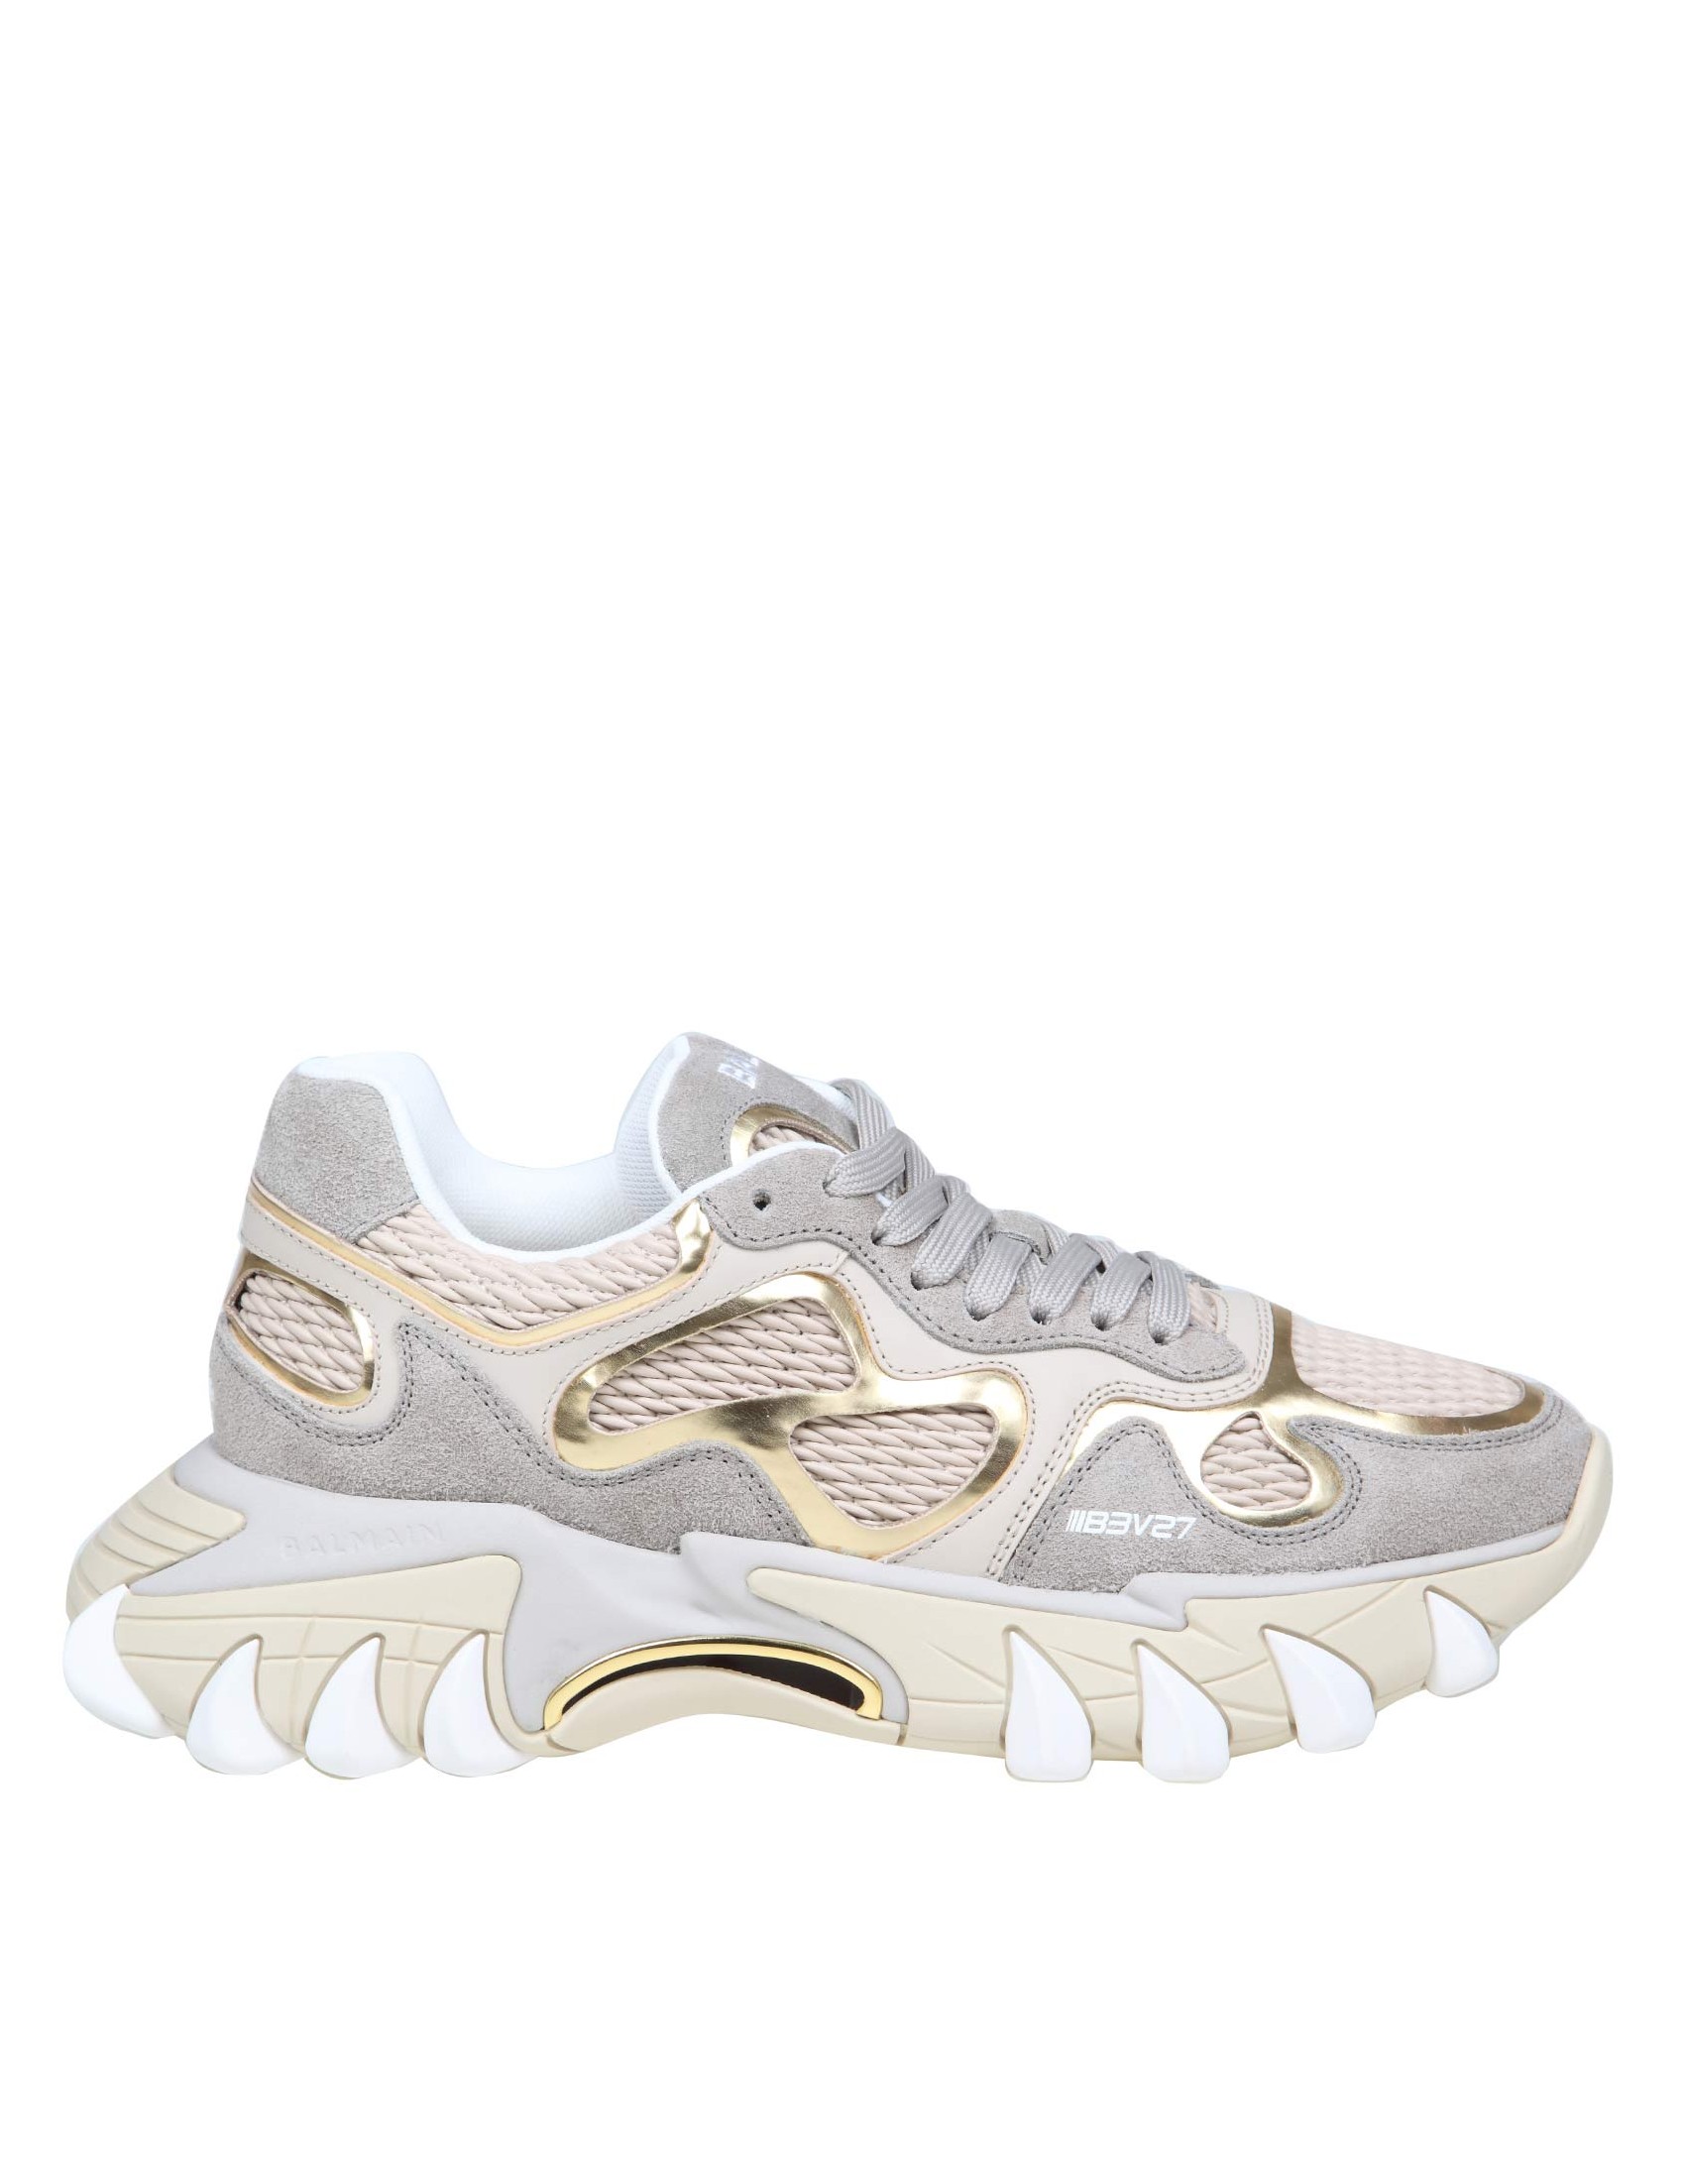 BALMAIN B-EAST SNEAKERS IN GRAY AND GOLD SUEDE AND LEATHER